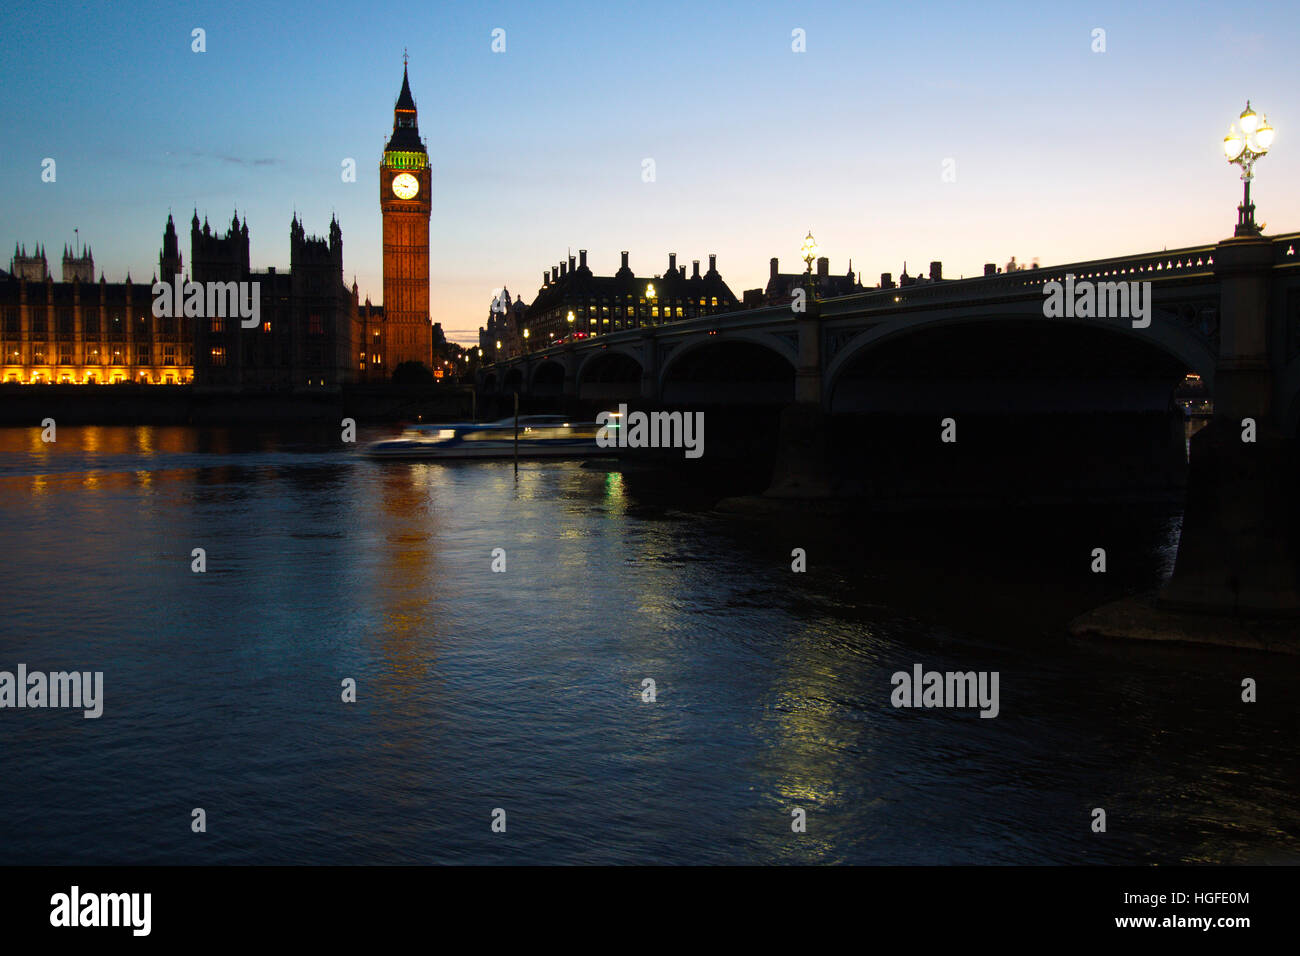 Parliament and Big Ben in London Stock Photo